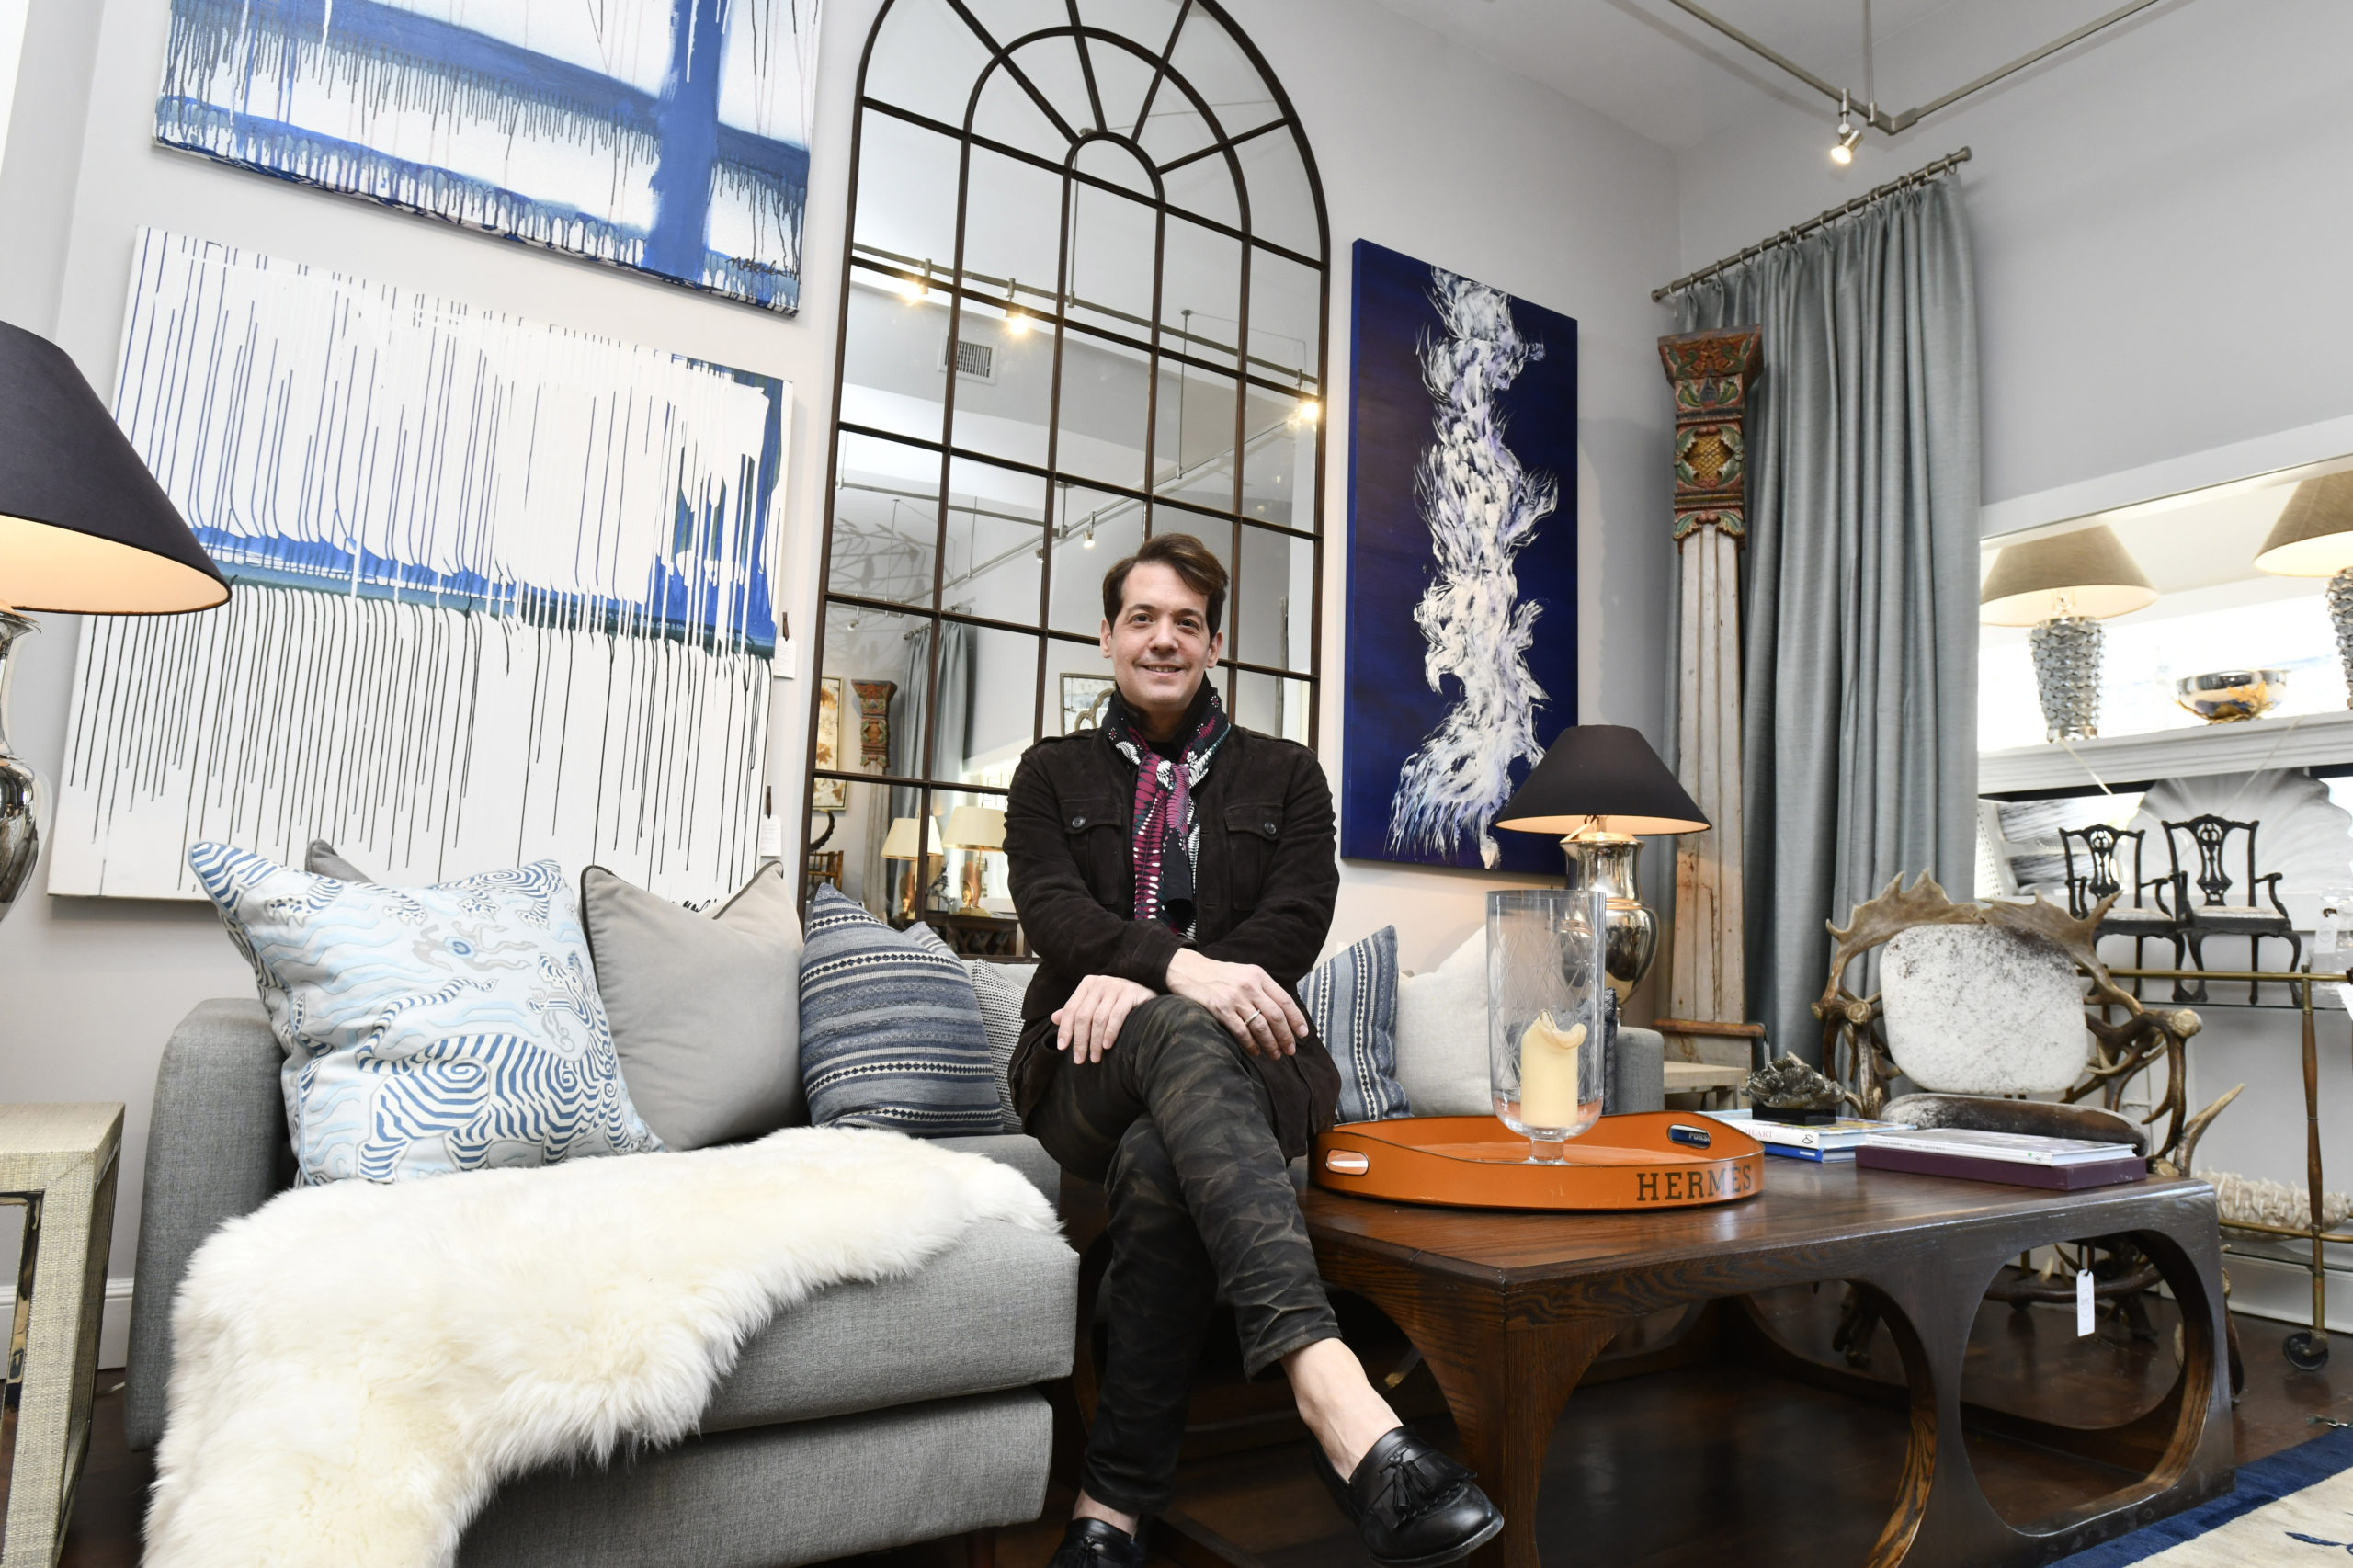 March 7 -- Old Town Crossing proprietor Sean Bruns at the interior design firm’s new location on Hampton Road in Southampton Village. When Old Town W Crossing, a preeminent Southampton interior design firm, opened in 1978, it enjoyed one of the perks of a bygone Hamptons era: exceptional foot traffic. Perched, at the time, on Main Street, and visible to all manner of passersby, the showroom attracted a steady influx of customers, cementing the business as a Southampton stalwart. But, five years ago, when general manager and designer Sean Bruns took over as proprietor of the business, Old Town Crossing relocated to its warehouse on Mariner Drive.